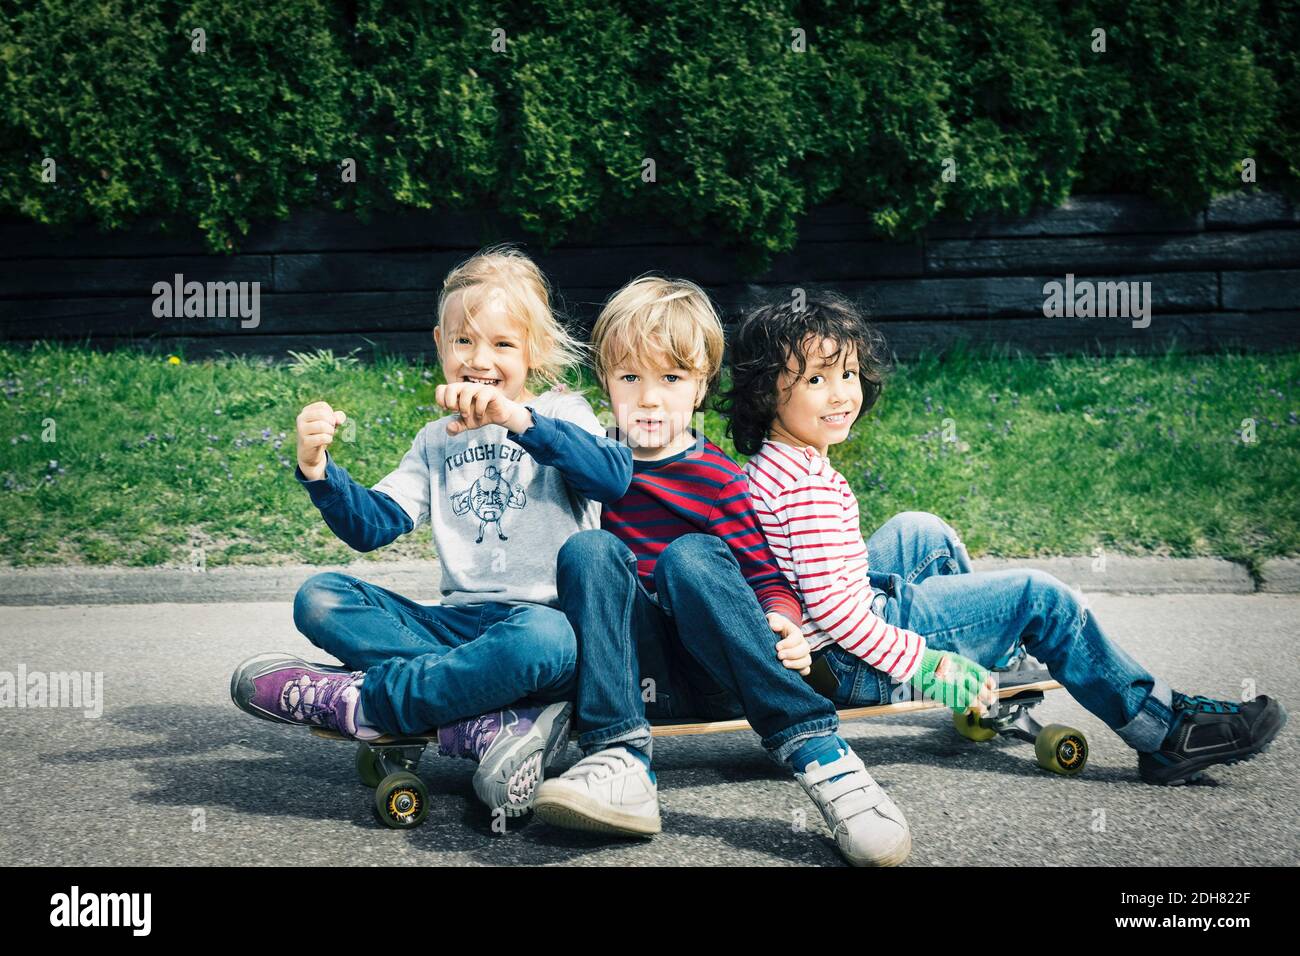 Portrait of happy friends sitting on skateboard against trees Stock Photo